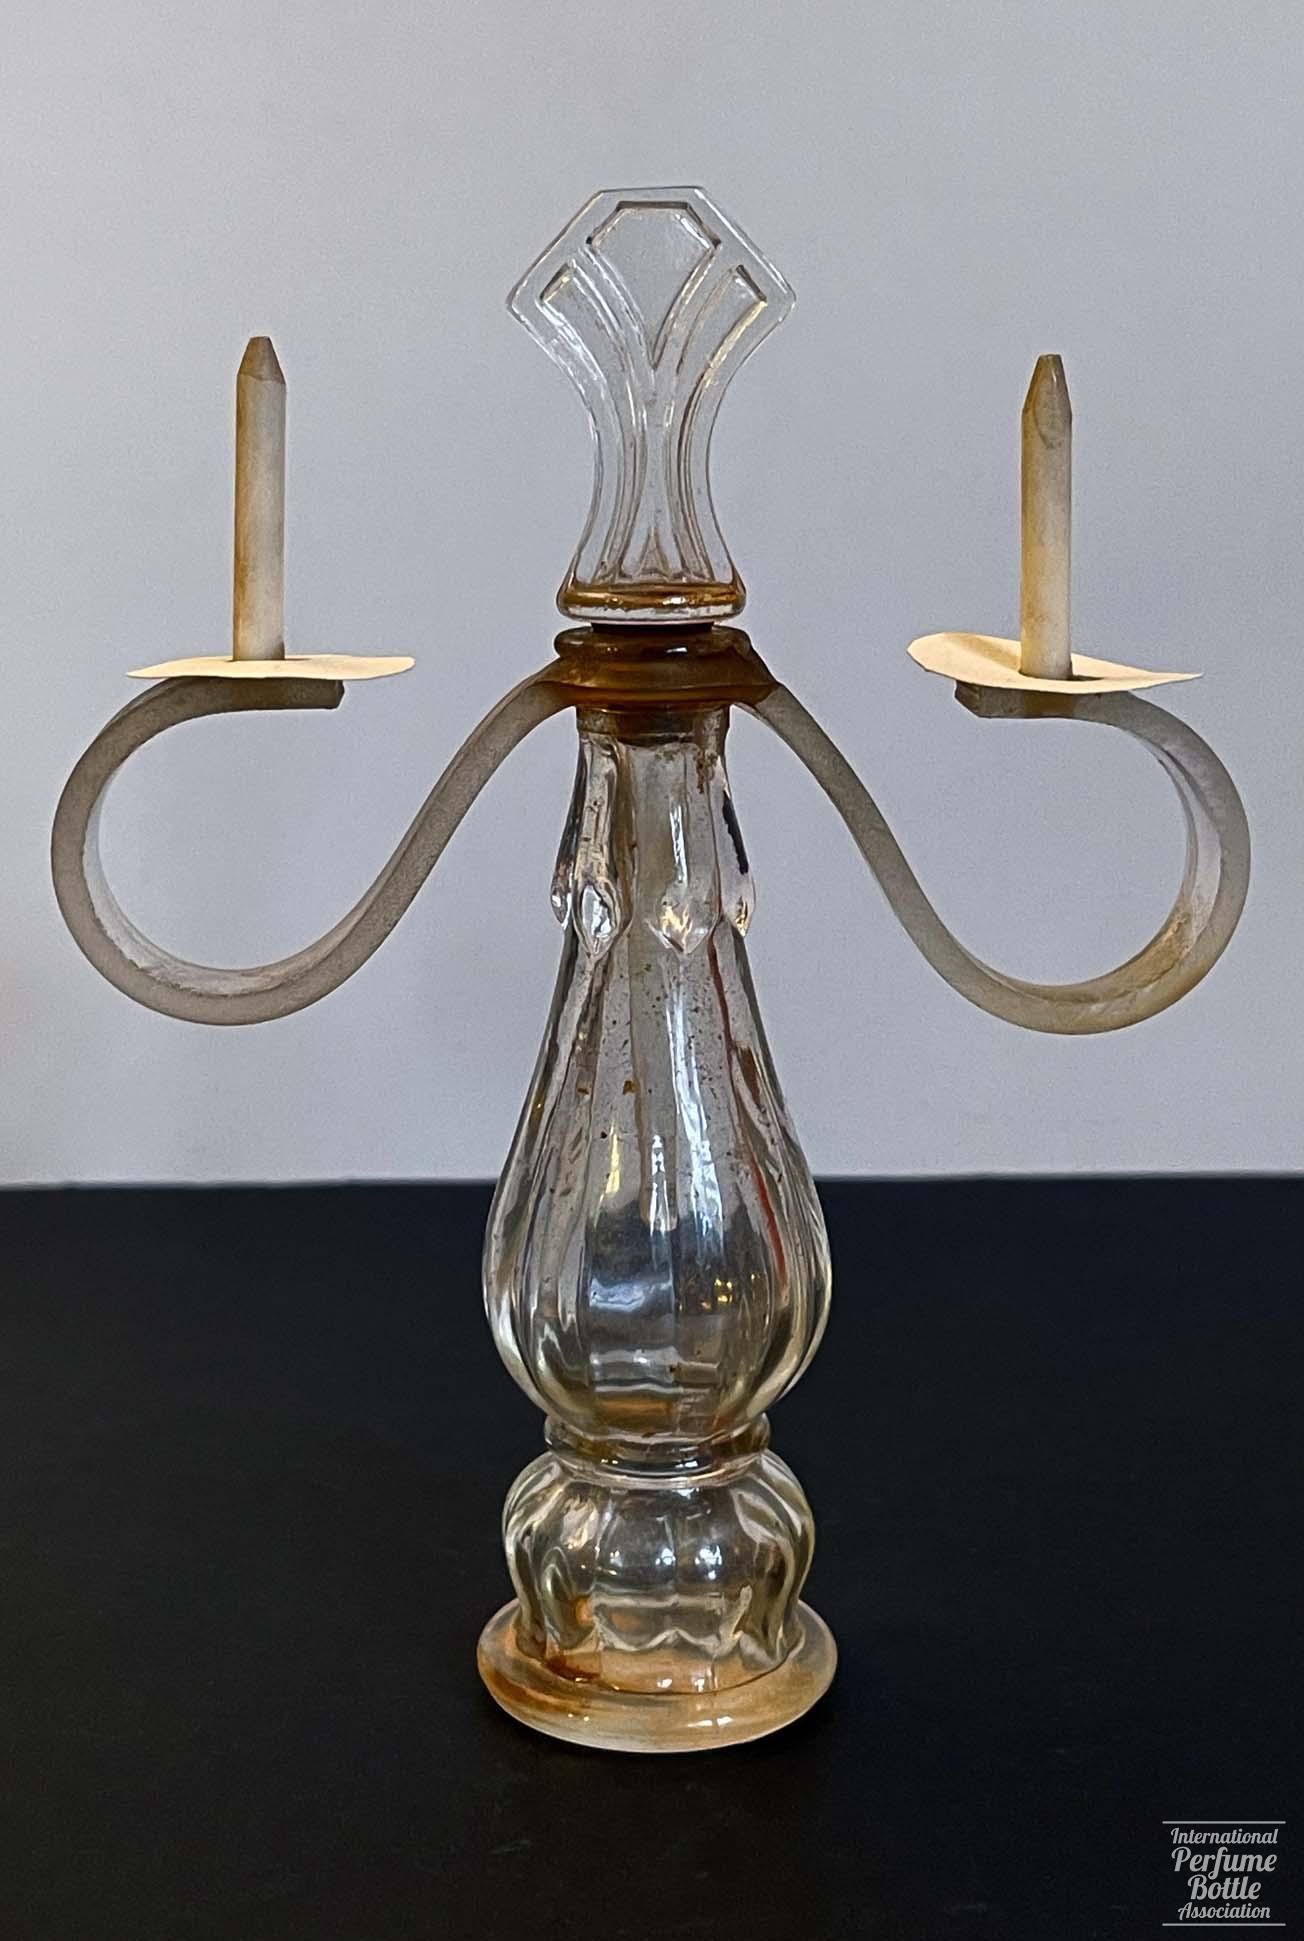 Candelabra by Babs